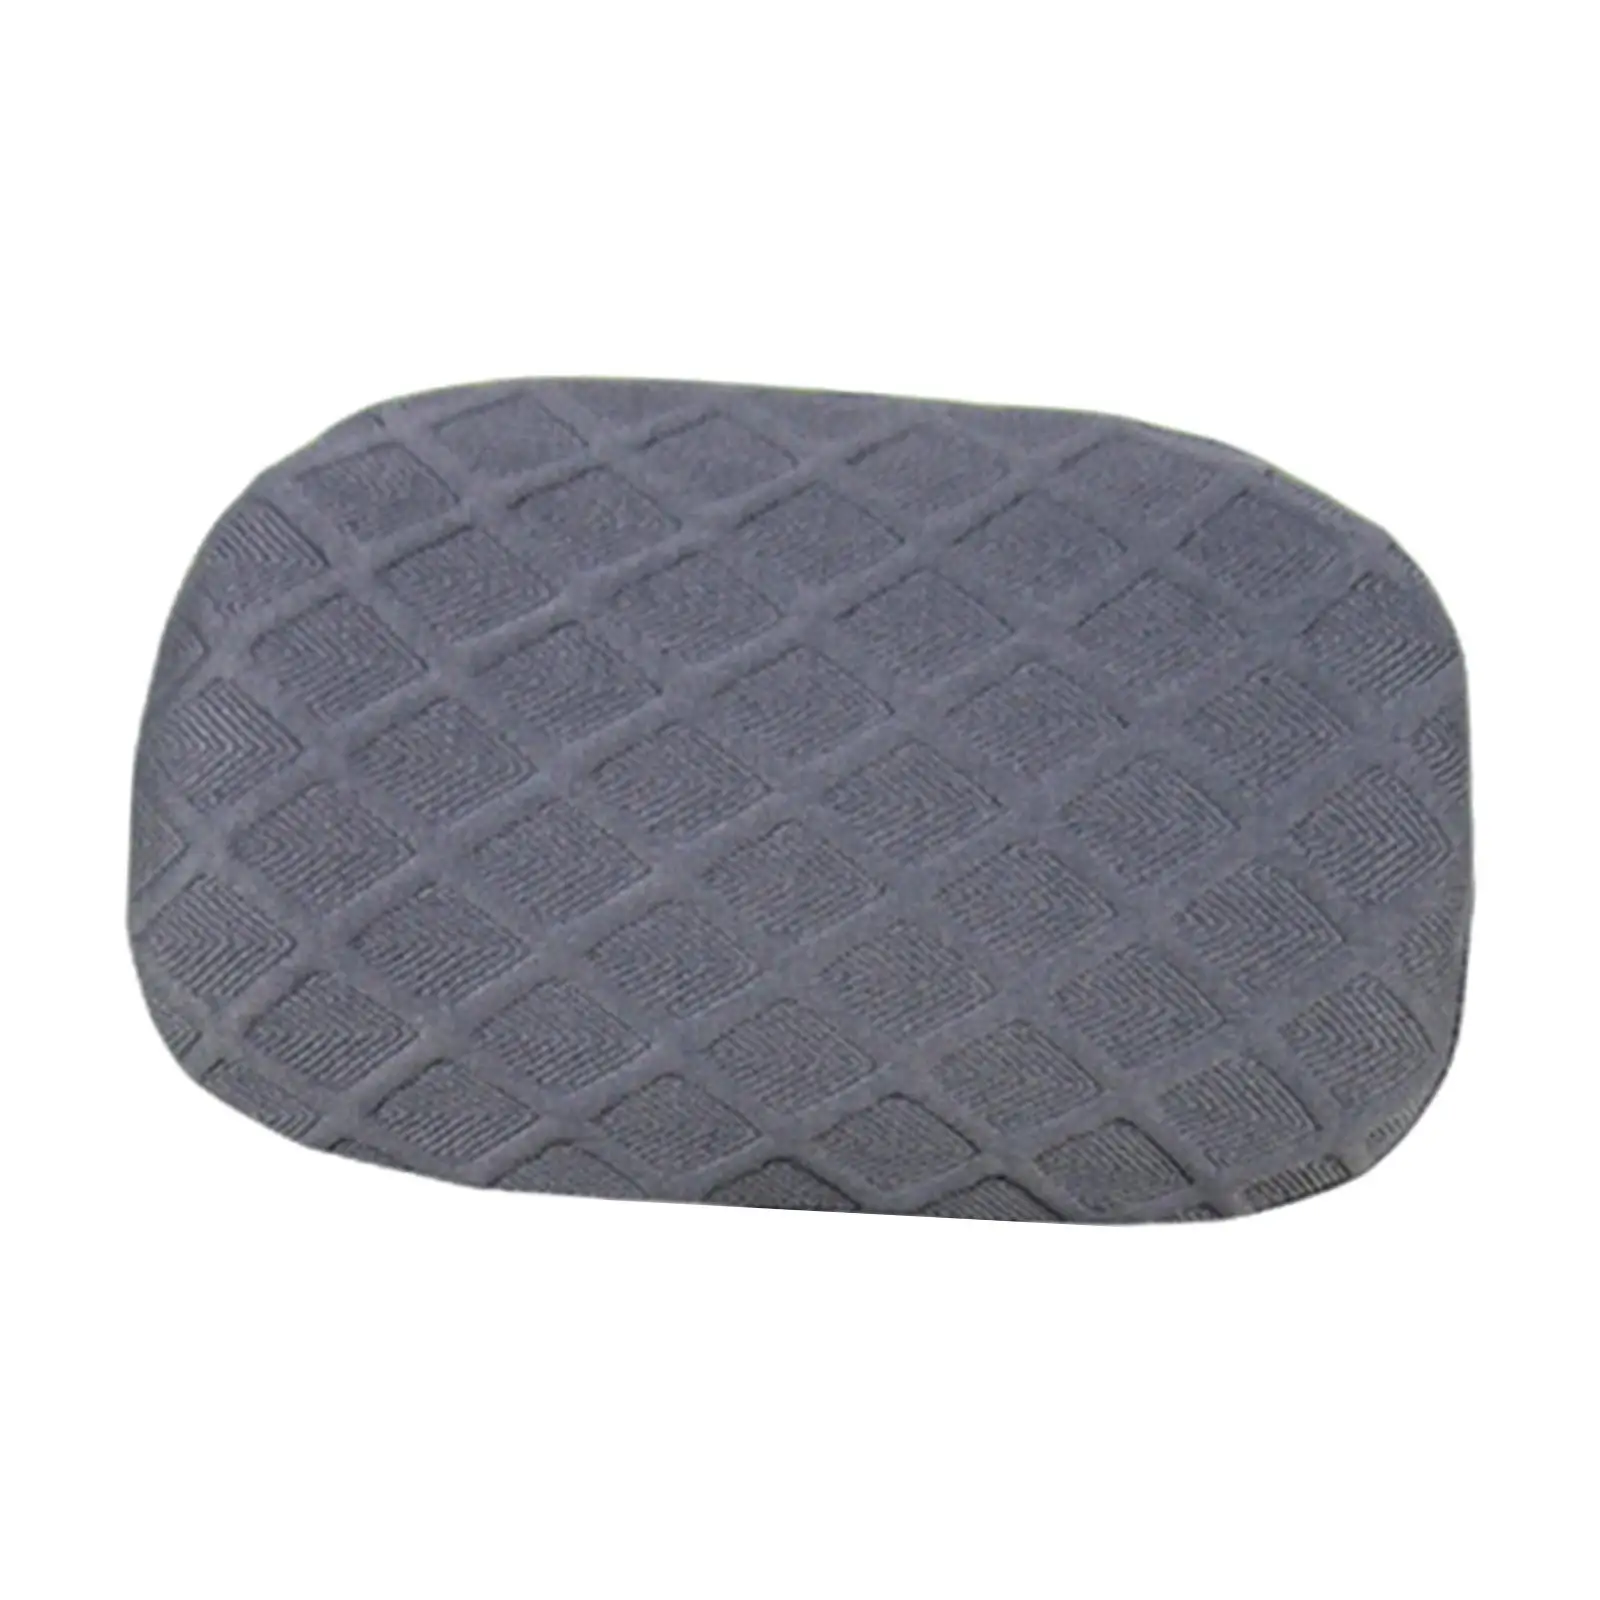 polyester office chair head pillow cover, gaming chair headrest cover, gaming